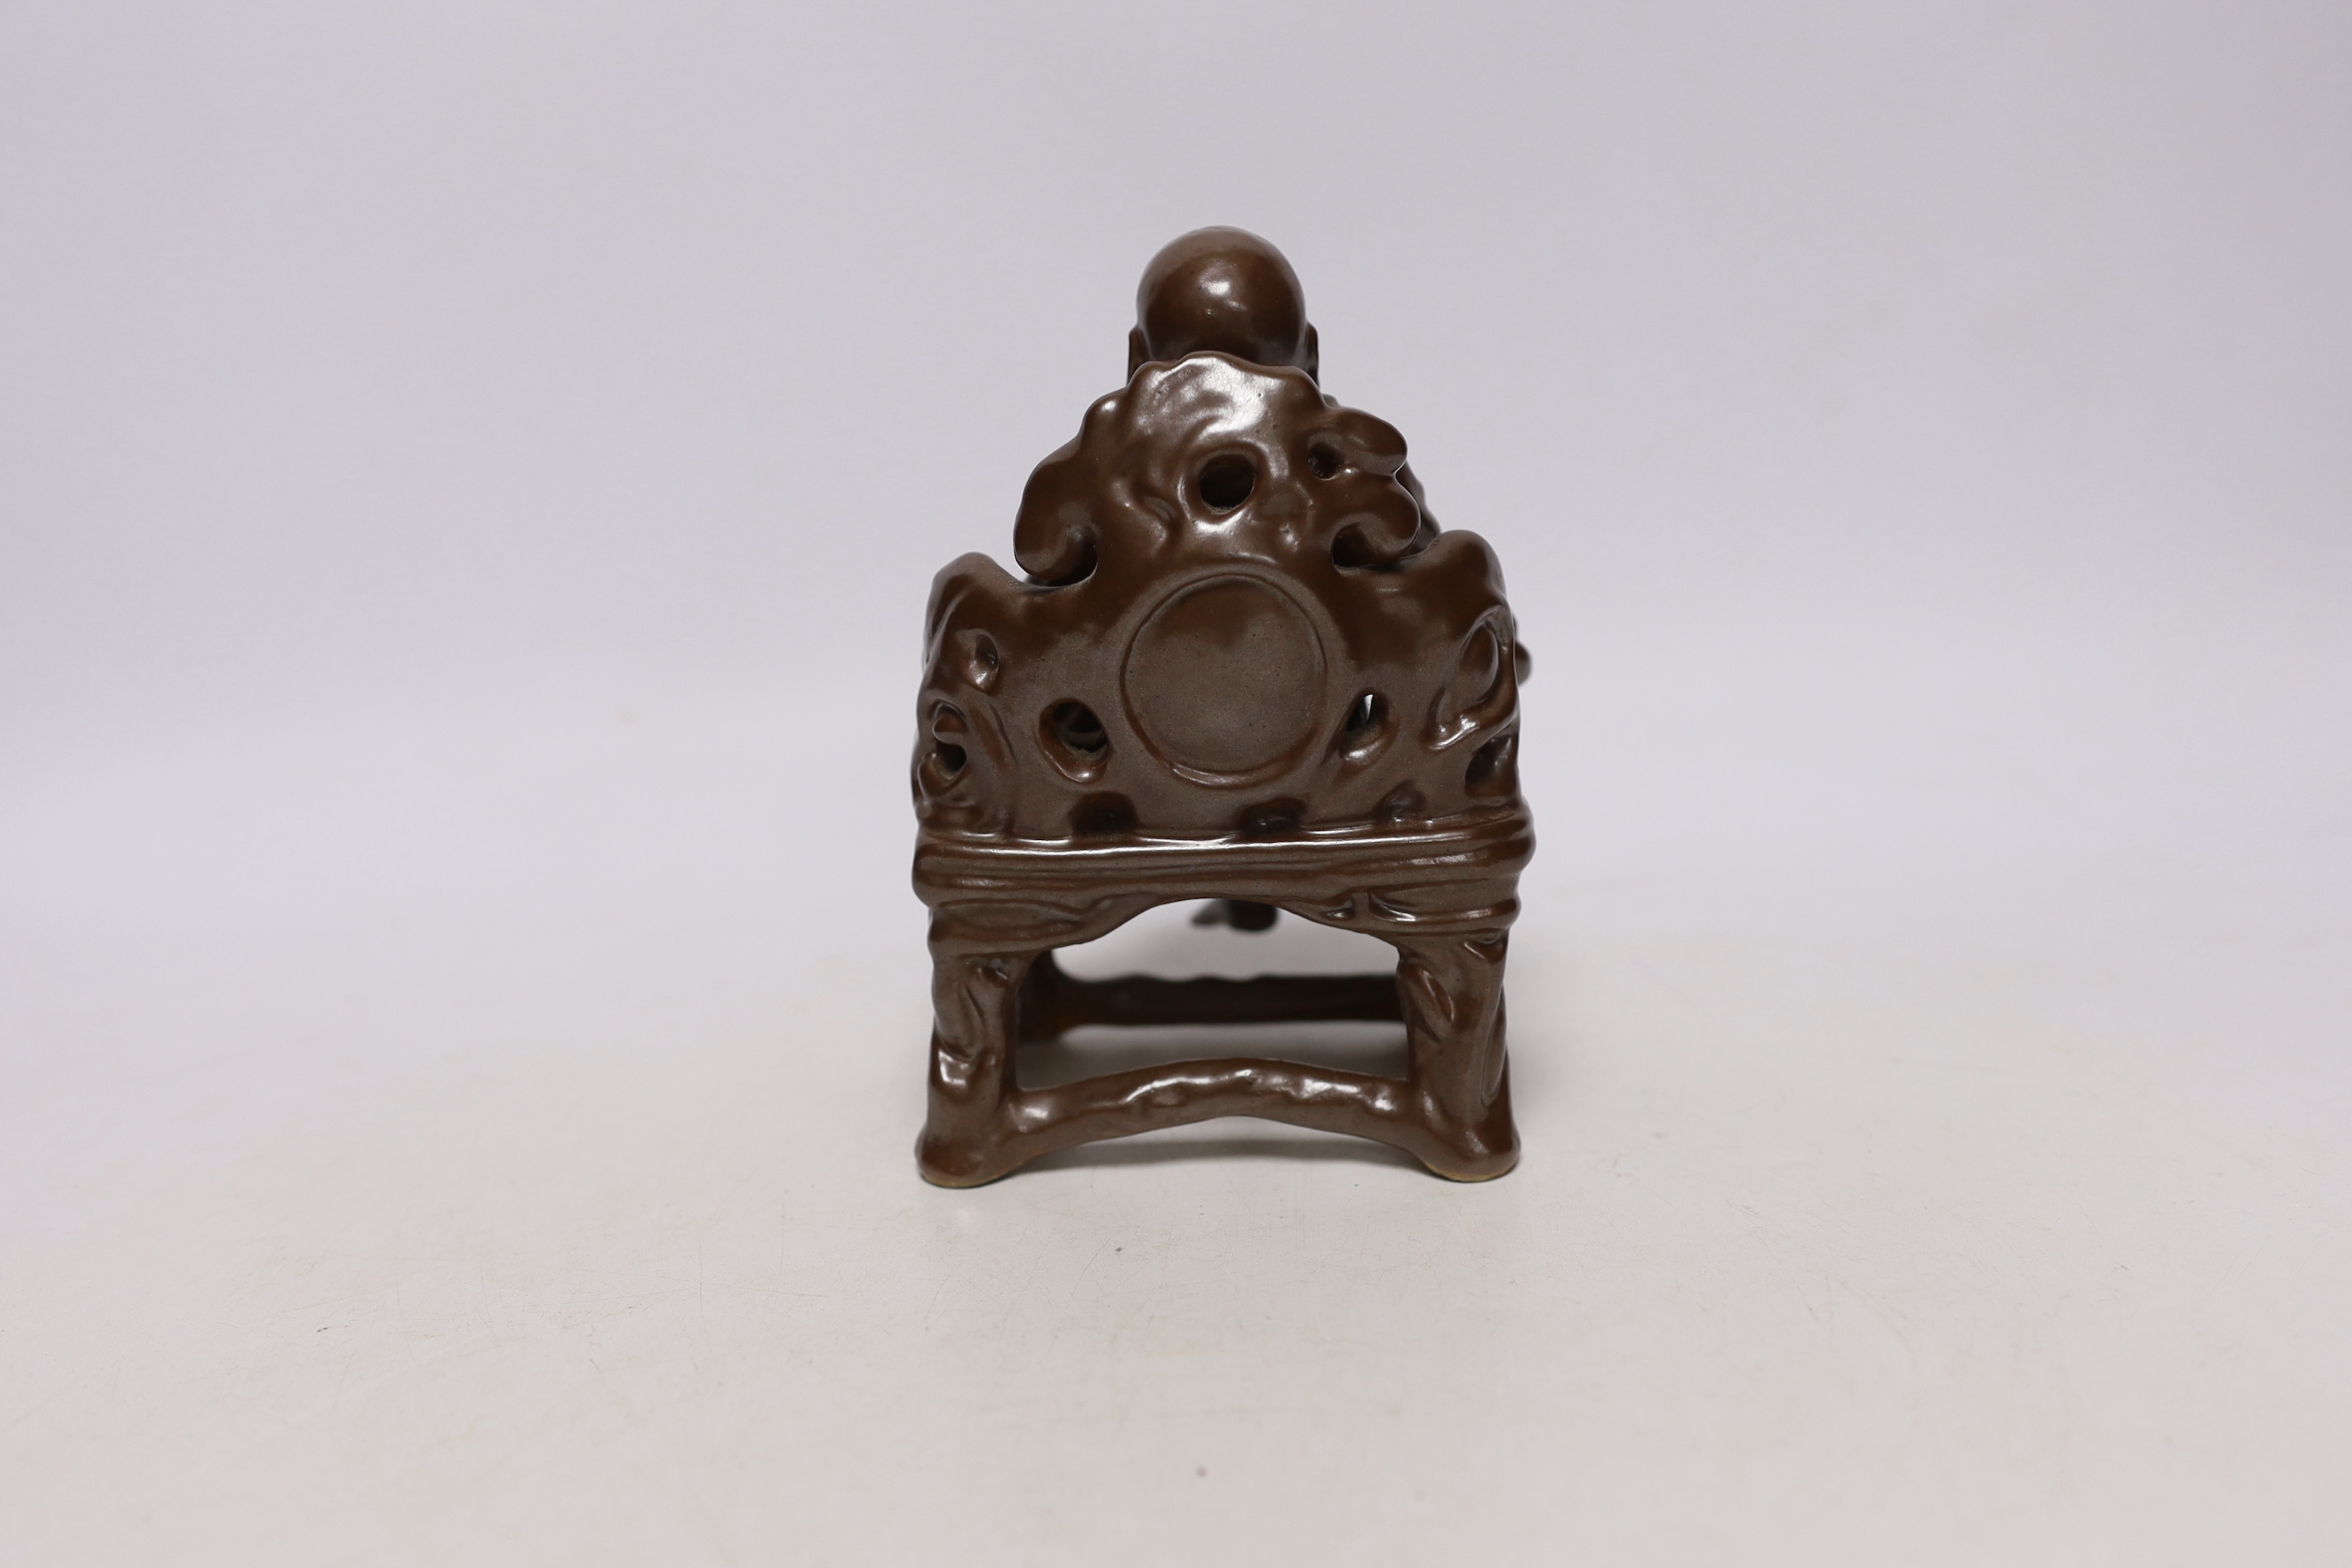 A late 19th/ early 20th century Chinese porcelain faux bronze figure of Budai seated on a throne, 15cm high, Provenance - Owned by the same family prior to 1980.